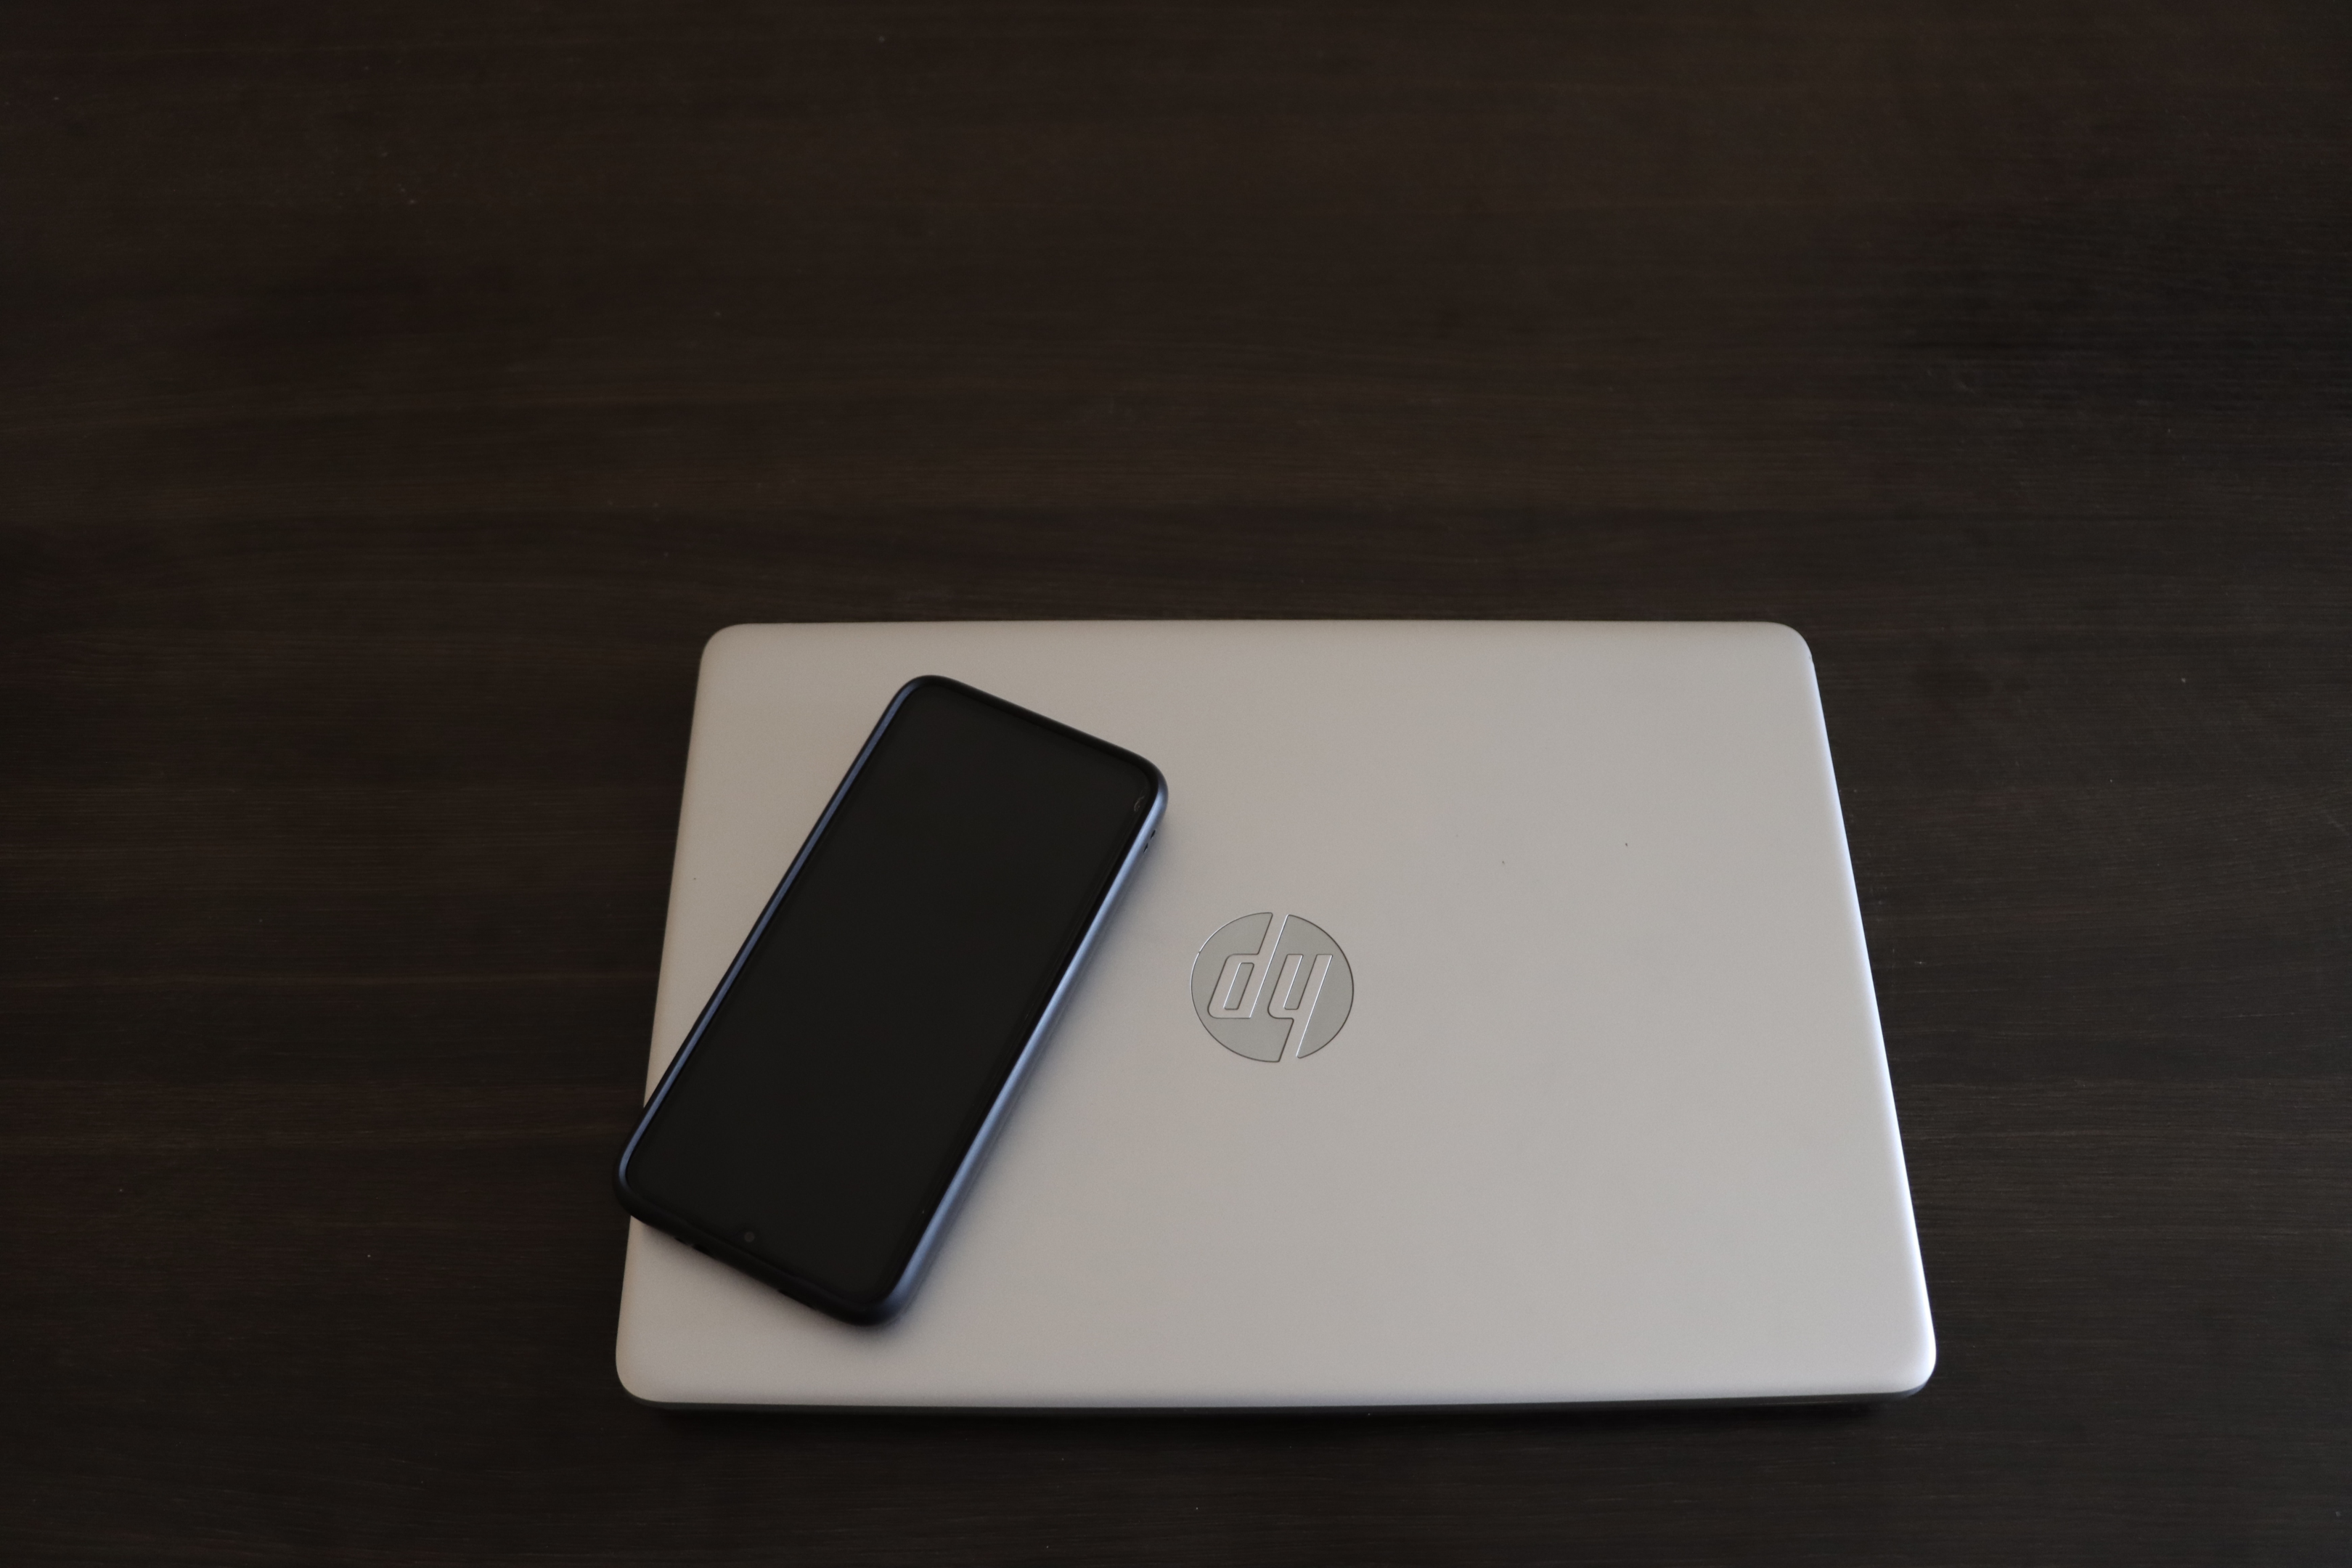 HP is a brand with a great portfolio of premium laptop models | Photo by Ahmed Lishane from Pexels